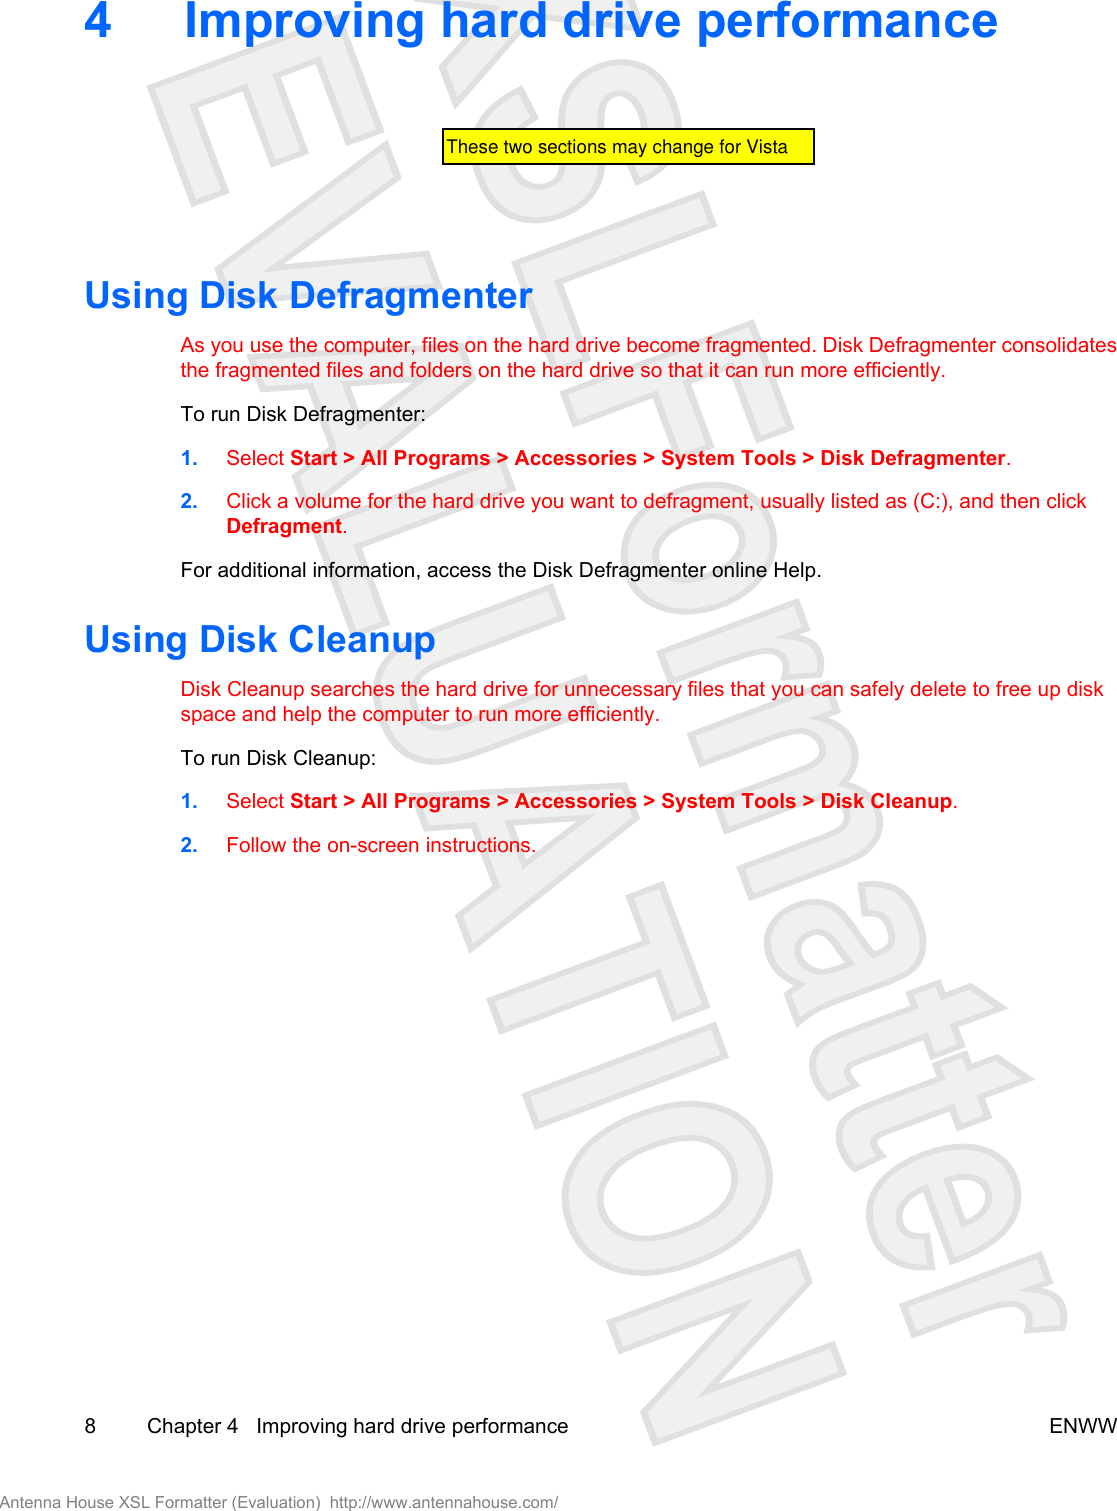 4 Improving hard drive performanceUsing Disk DefragmenterAs you use the computer, files on the hard drive become fragmented. Disk Defragmenter consolidatesthe fragmented files and folders on the hard drive so that it can run more efficiently.To run Disk Defragmenter:1. Select Start &gt; All Programs &gt; Accessories &gt; System Tools &gt; Disk Defragmenter.2. Click a volume for the hard drive you want to defragment, usually listed as (C:), and then clickDefragment.For additional information, access the Disk Defragmenter online Help.Using Disk CleanupDisk Cleanup searches the hard drive for unnecessary files that you can safely delete to free up diskspace and help the computer to run more efficiently.To run Disk Cleanup:1. Select Start &gt; All Programs &gt; Accessories &gt; System Tools &gt; Disk Cleanup.2. Follow the on-screen instructions.8 Chapter 4   Improving hard drive performance ENWWAntenna House XSL Formatter (Evaluation)  http://www.antennahouse.com/These two sections may change for Vista